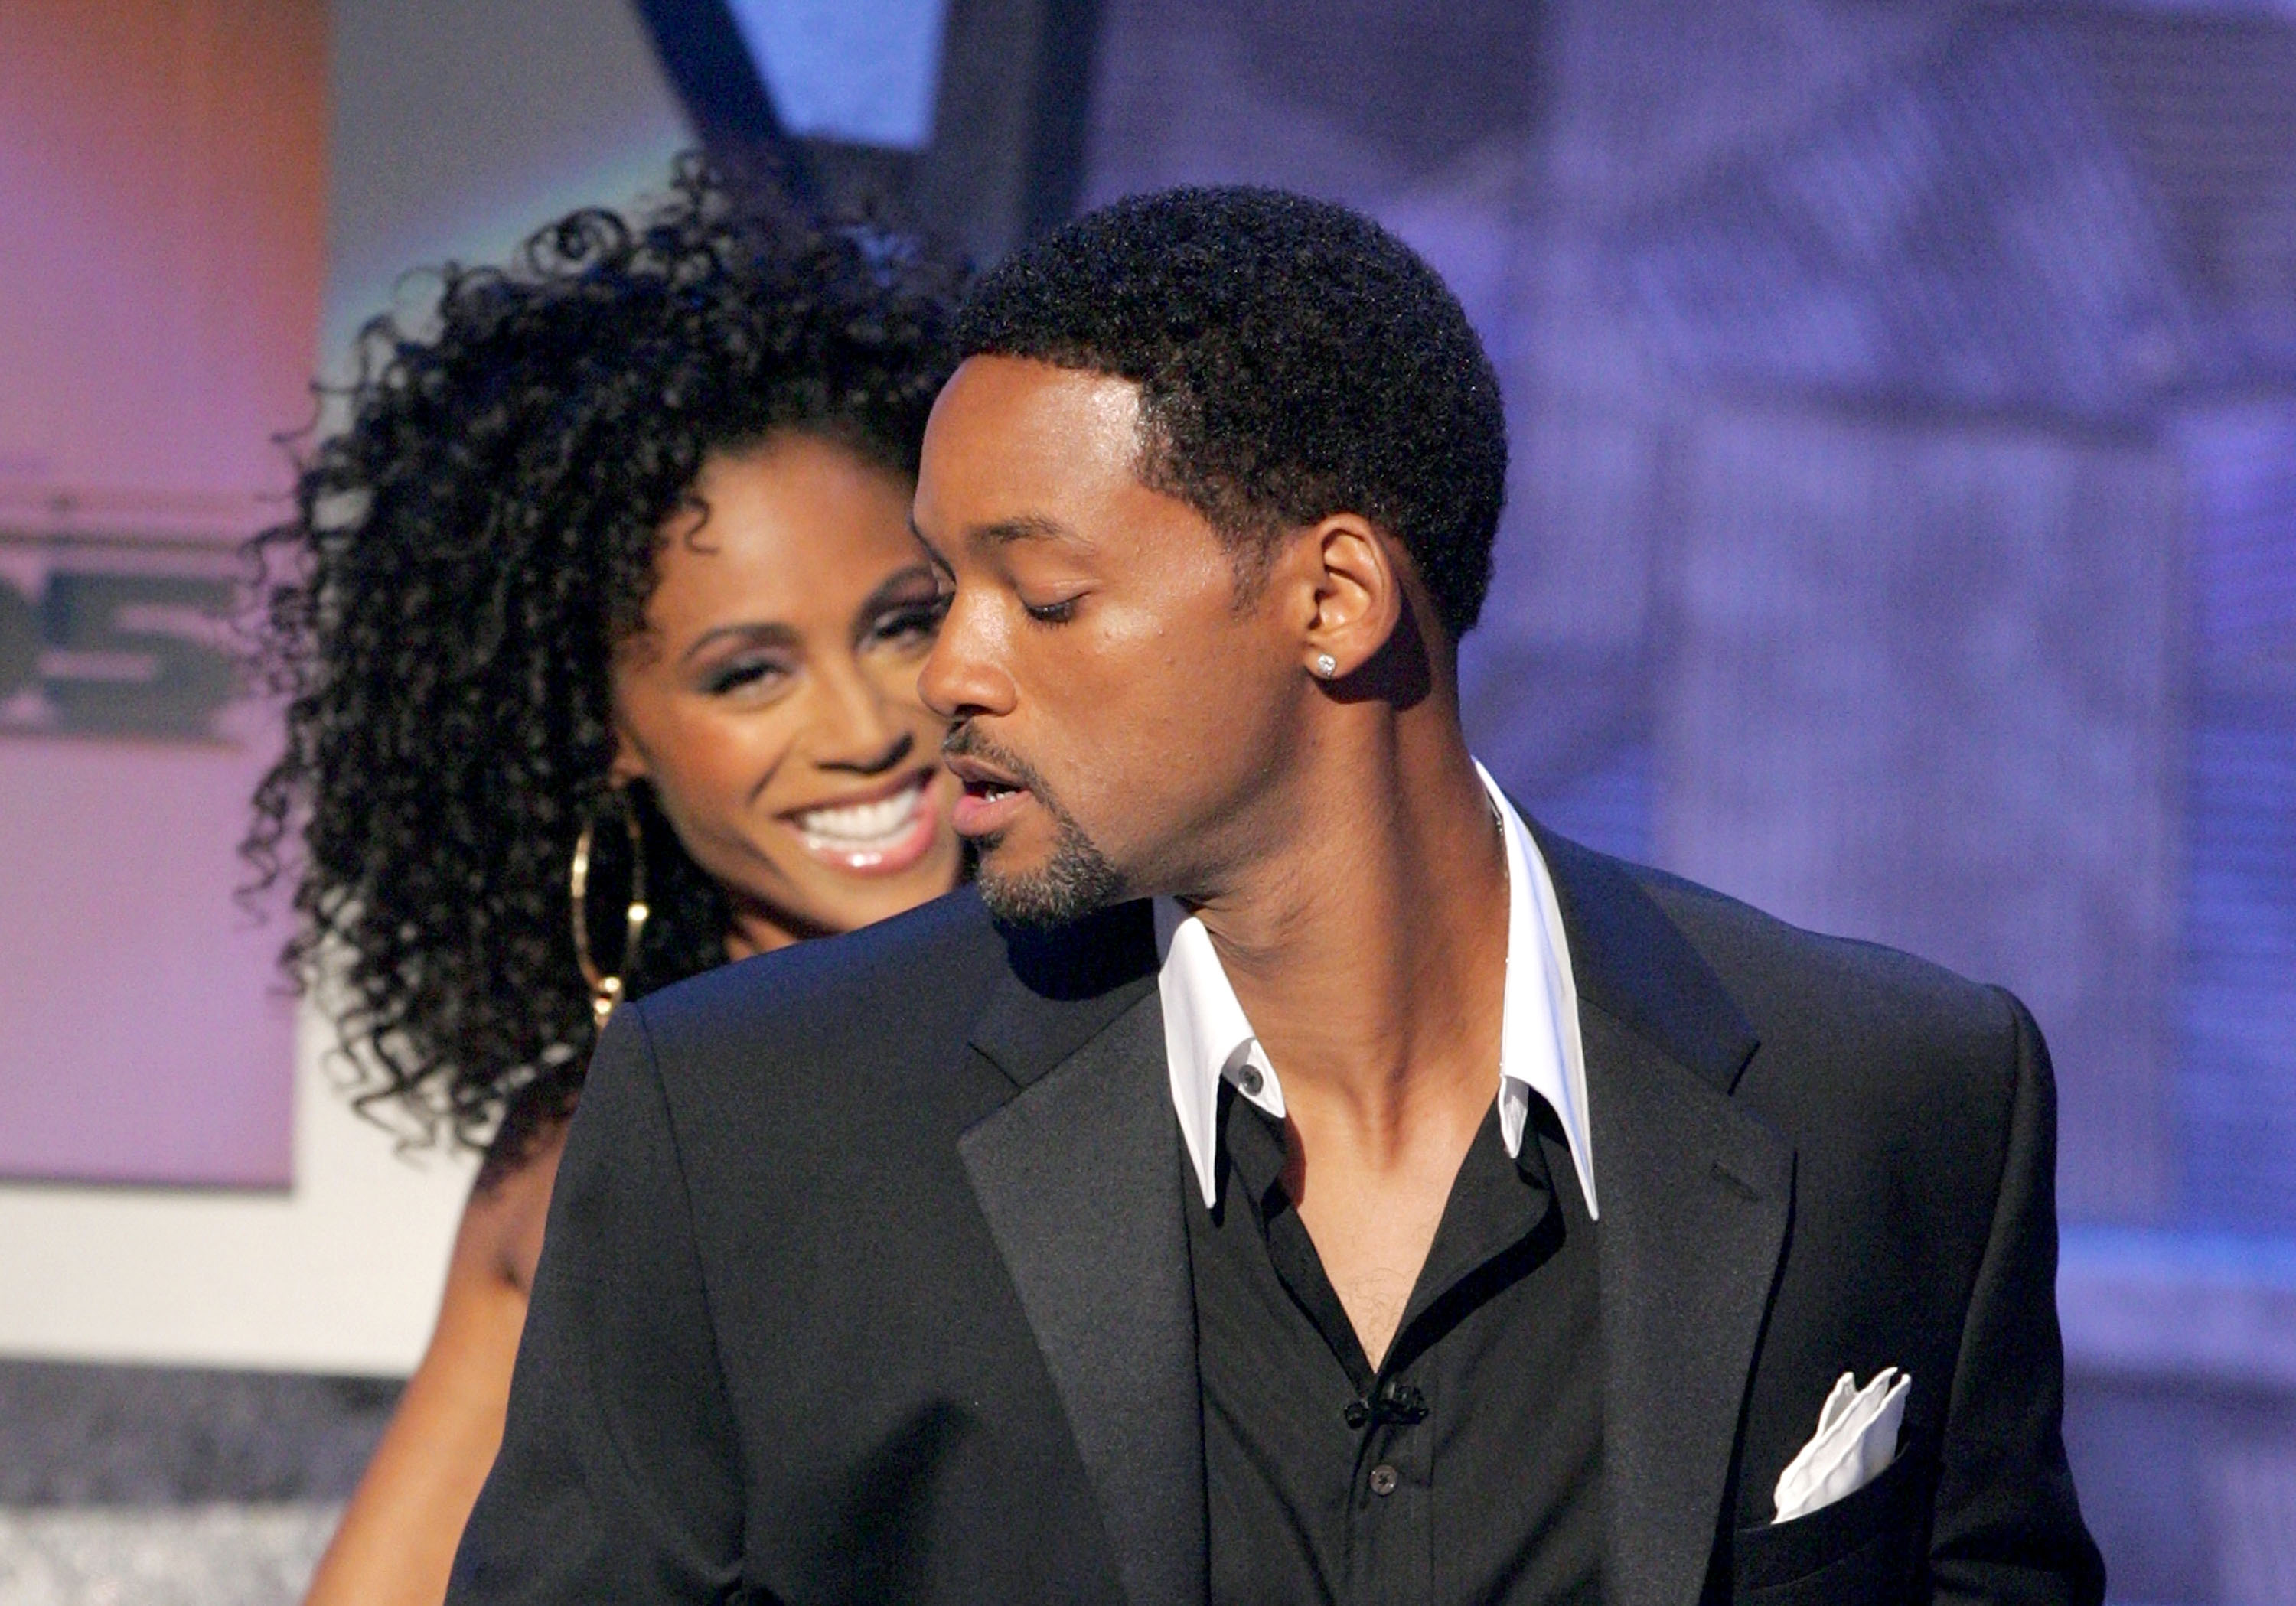 Jada Pinkett Smith and Will Smith at the BET Awards | Kevin Winter/Getty Images